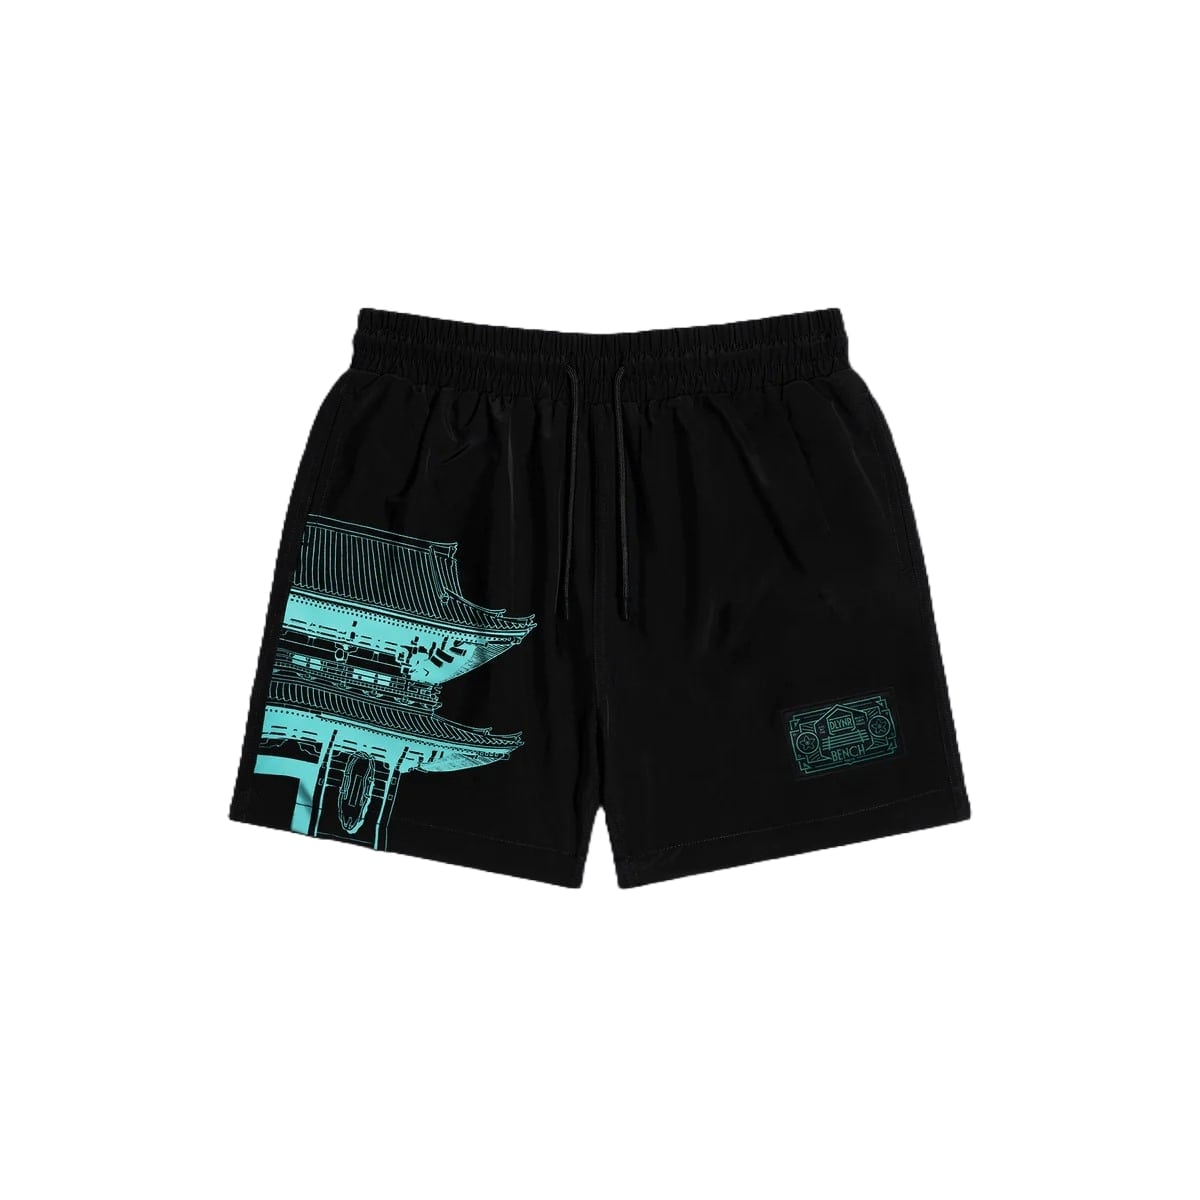 Dolly noire bench tokyo swimshorts WW178-WC-03